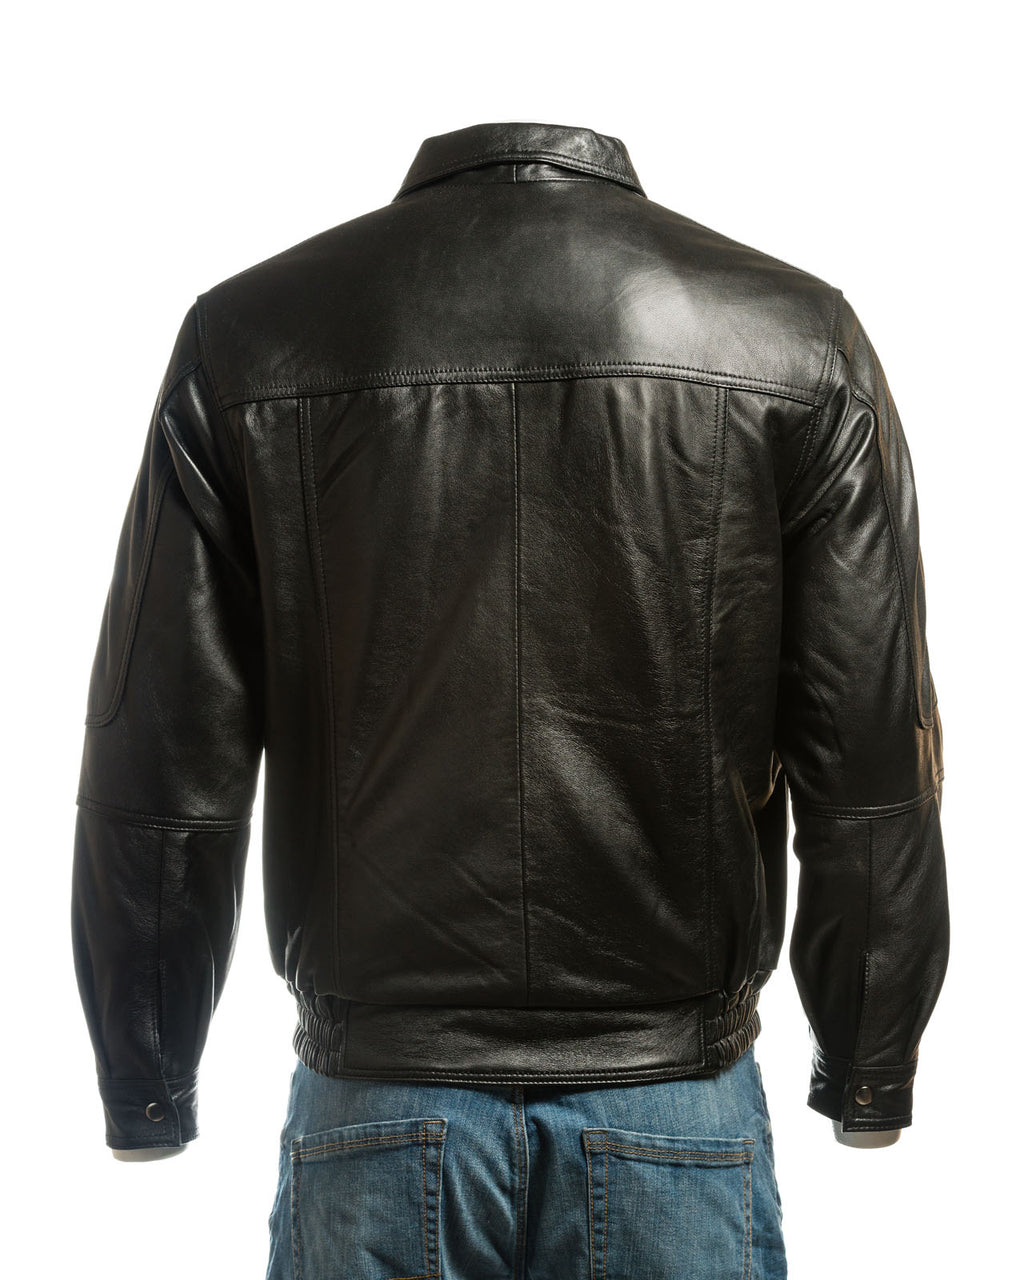 Men's Black Simple Blouson Style Leather Jacket with Elasticated Waist: Giuliano